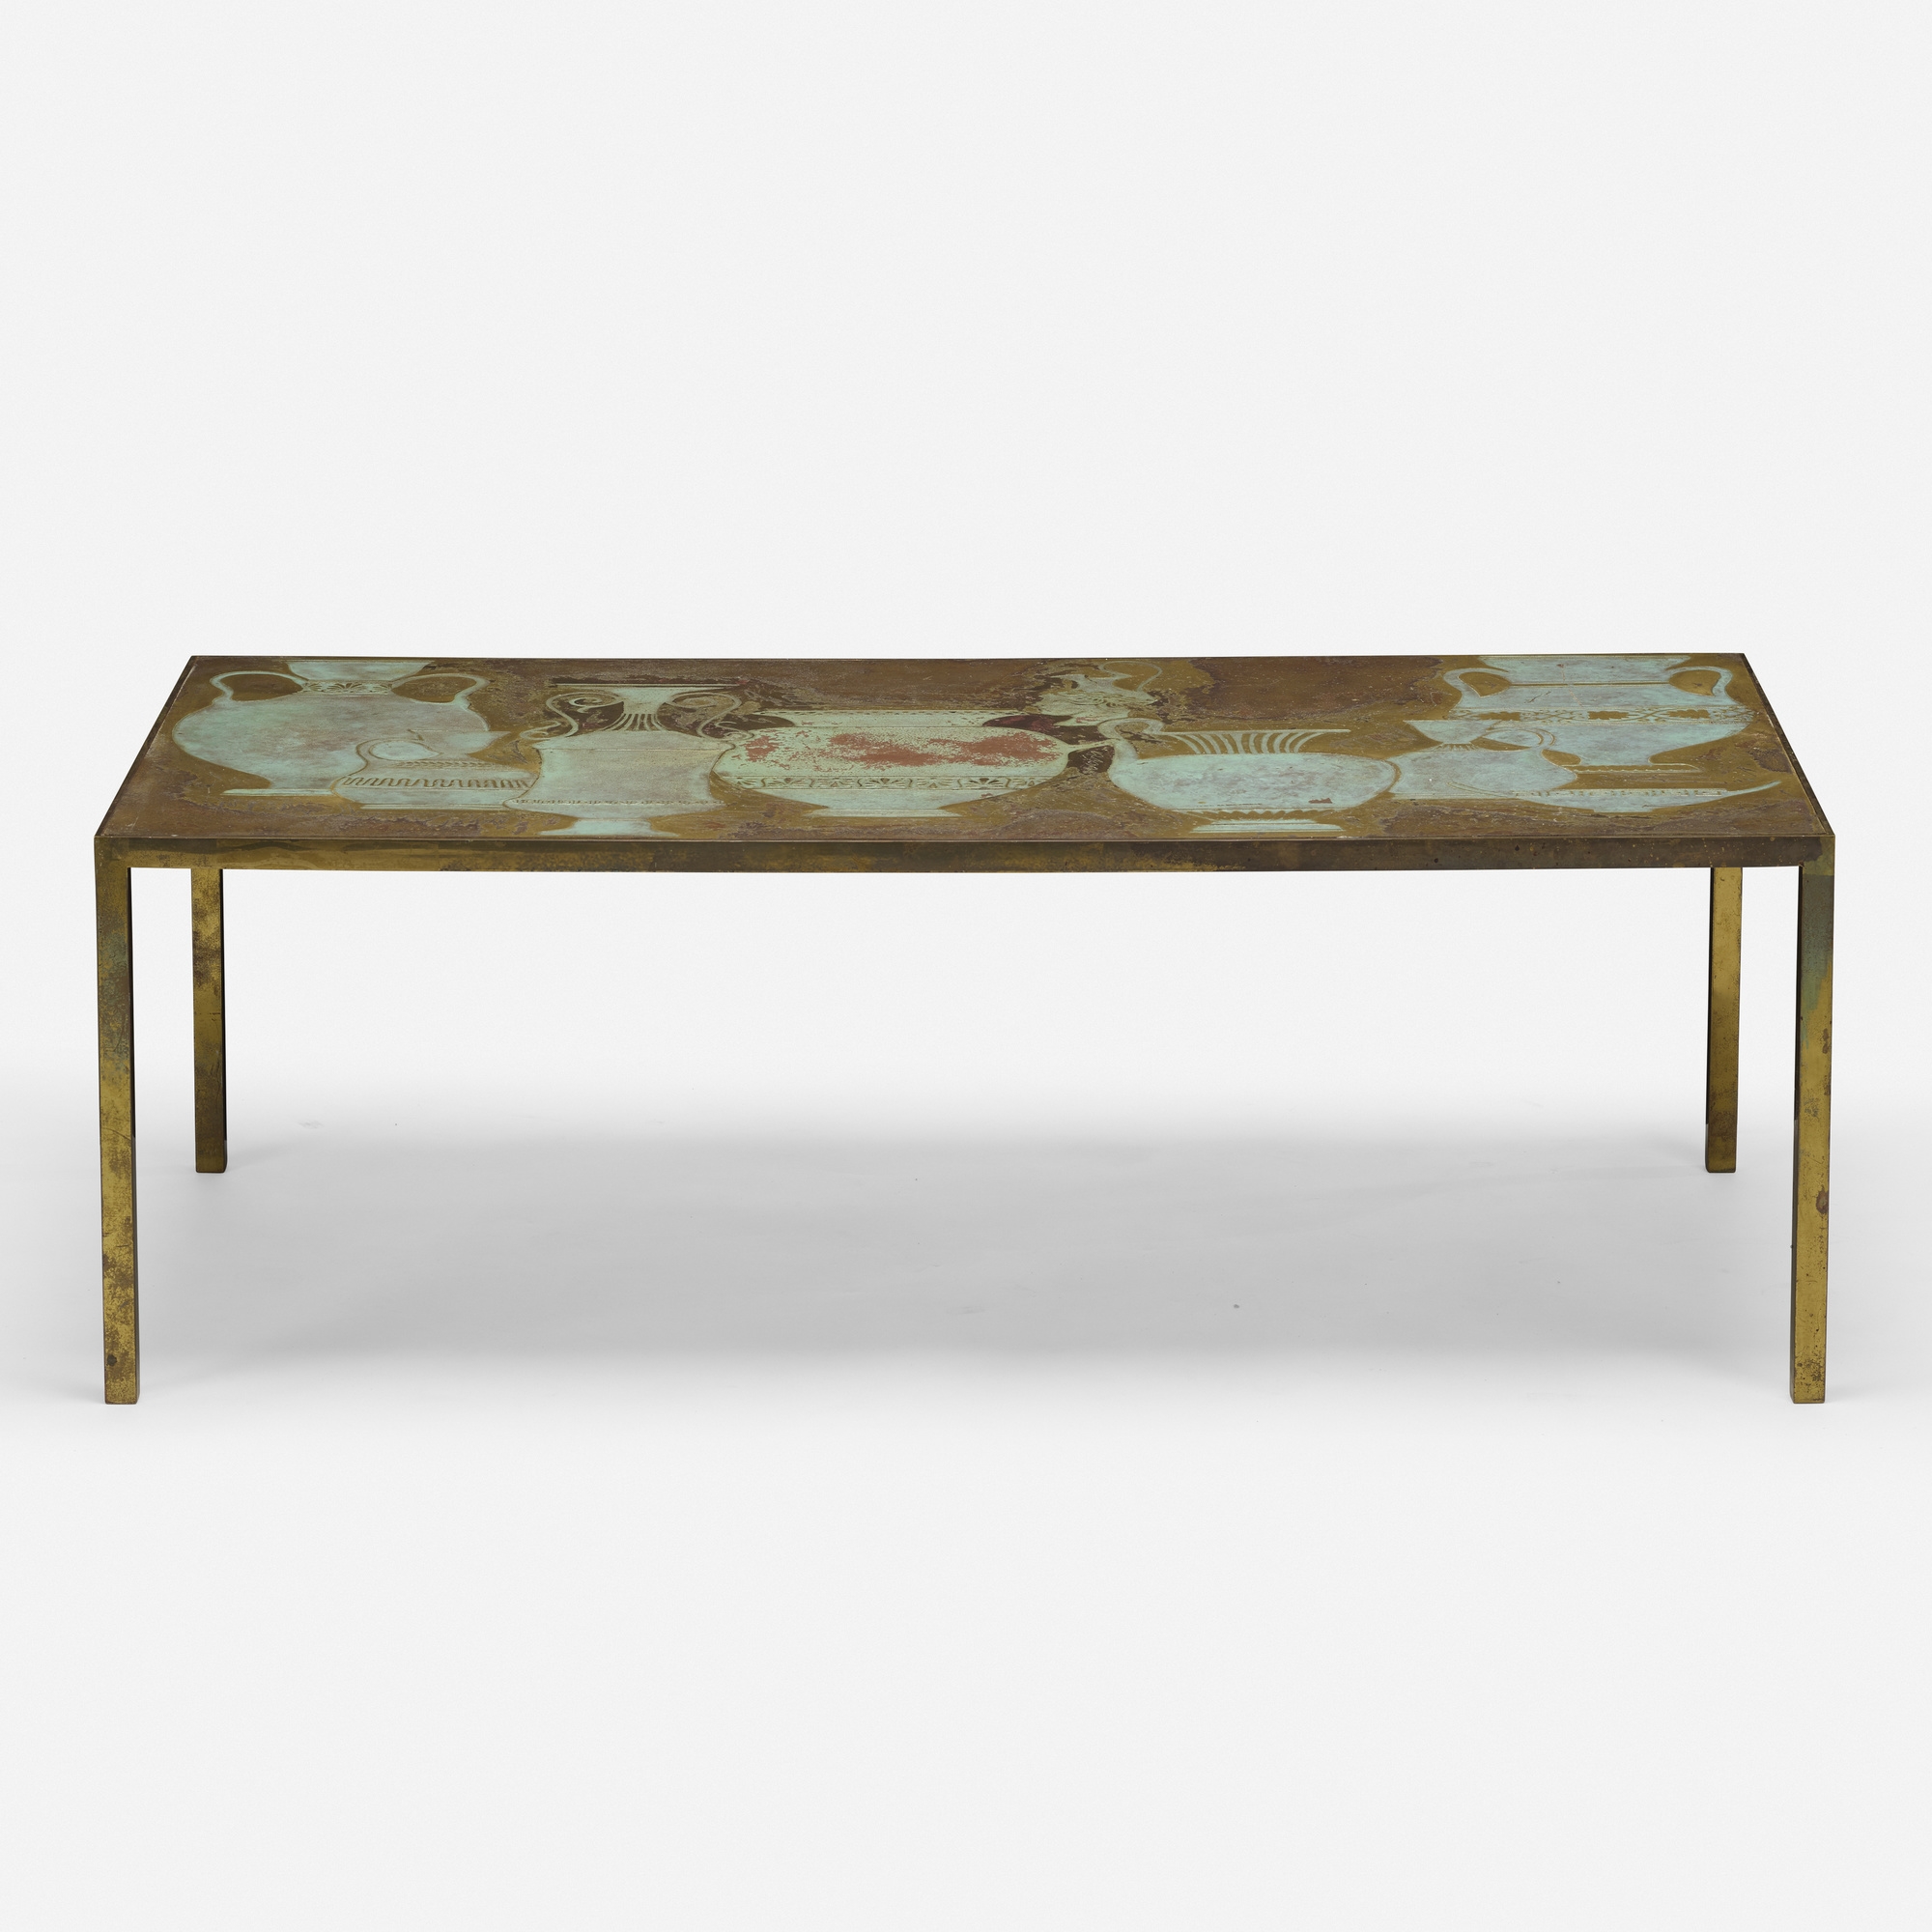 Signed Luigi etched brass coffee table